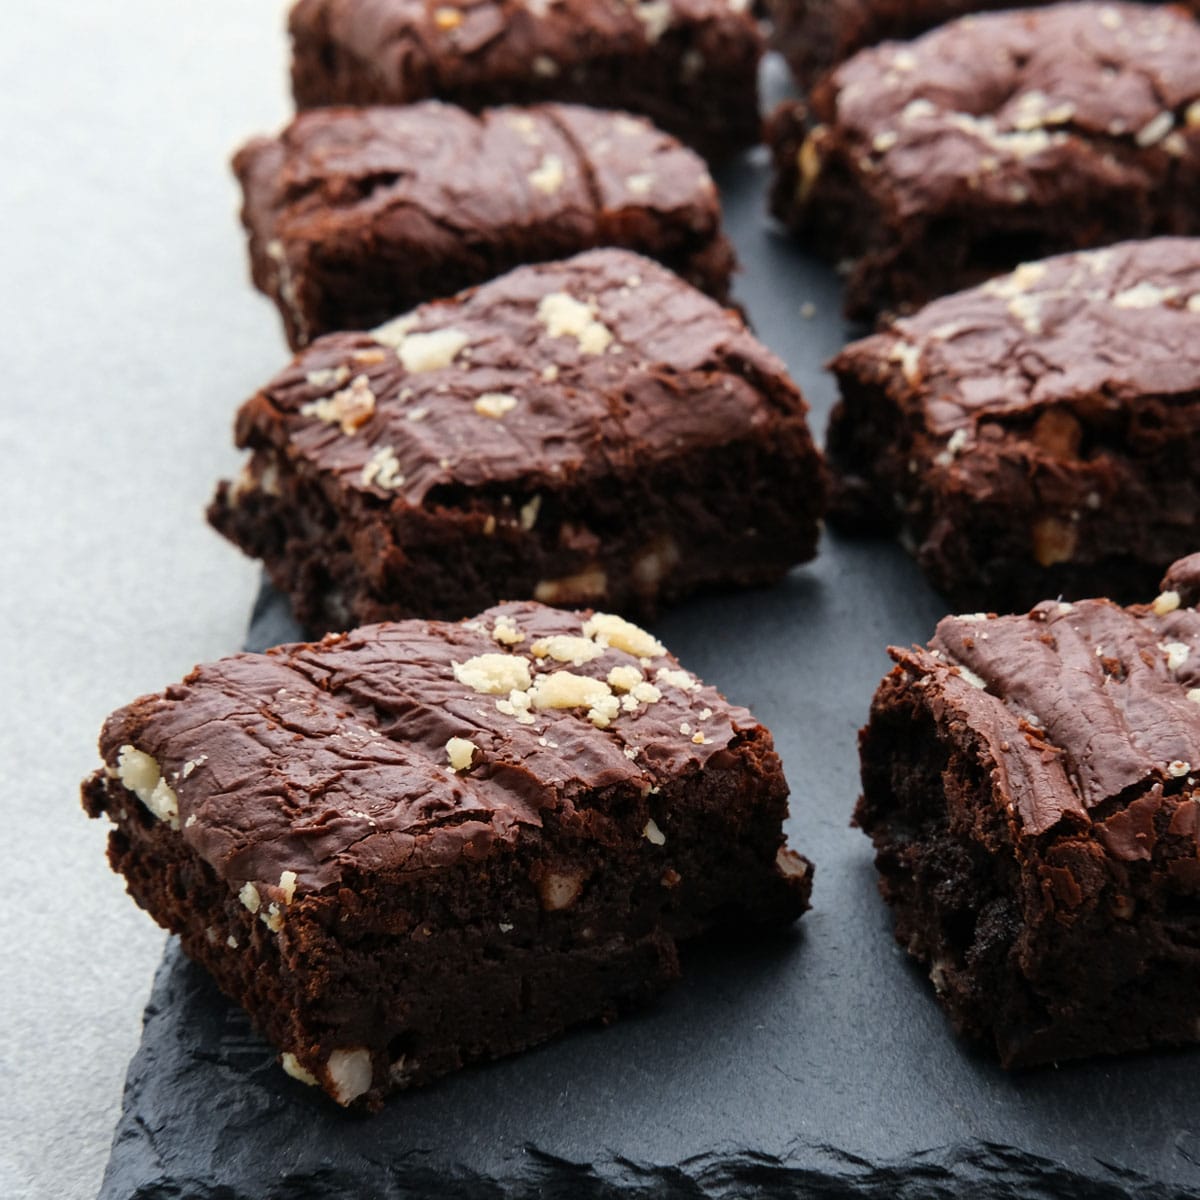 Master the art of brownie baking and conquer undercooked brownies for good! Follow our expert advice to achieve fudgy, irresistible treats every time.